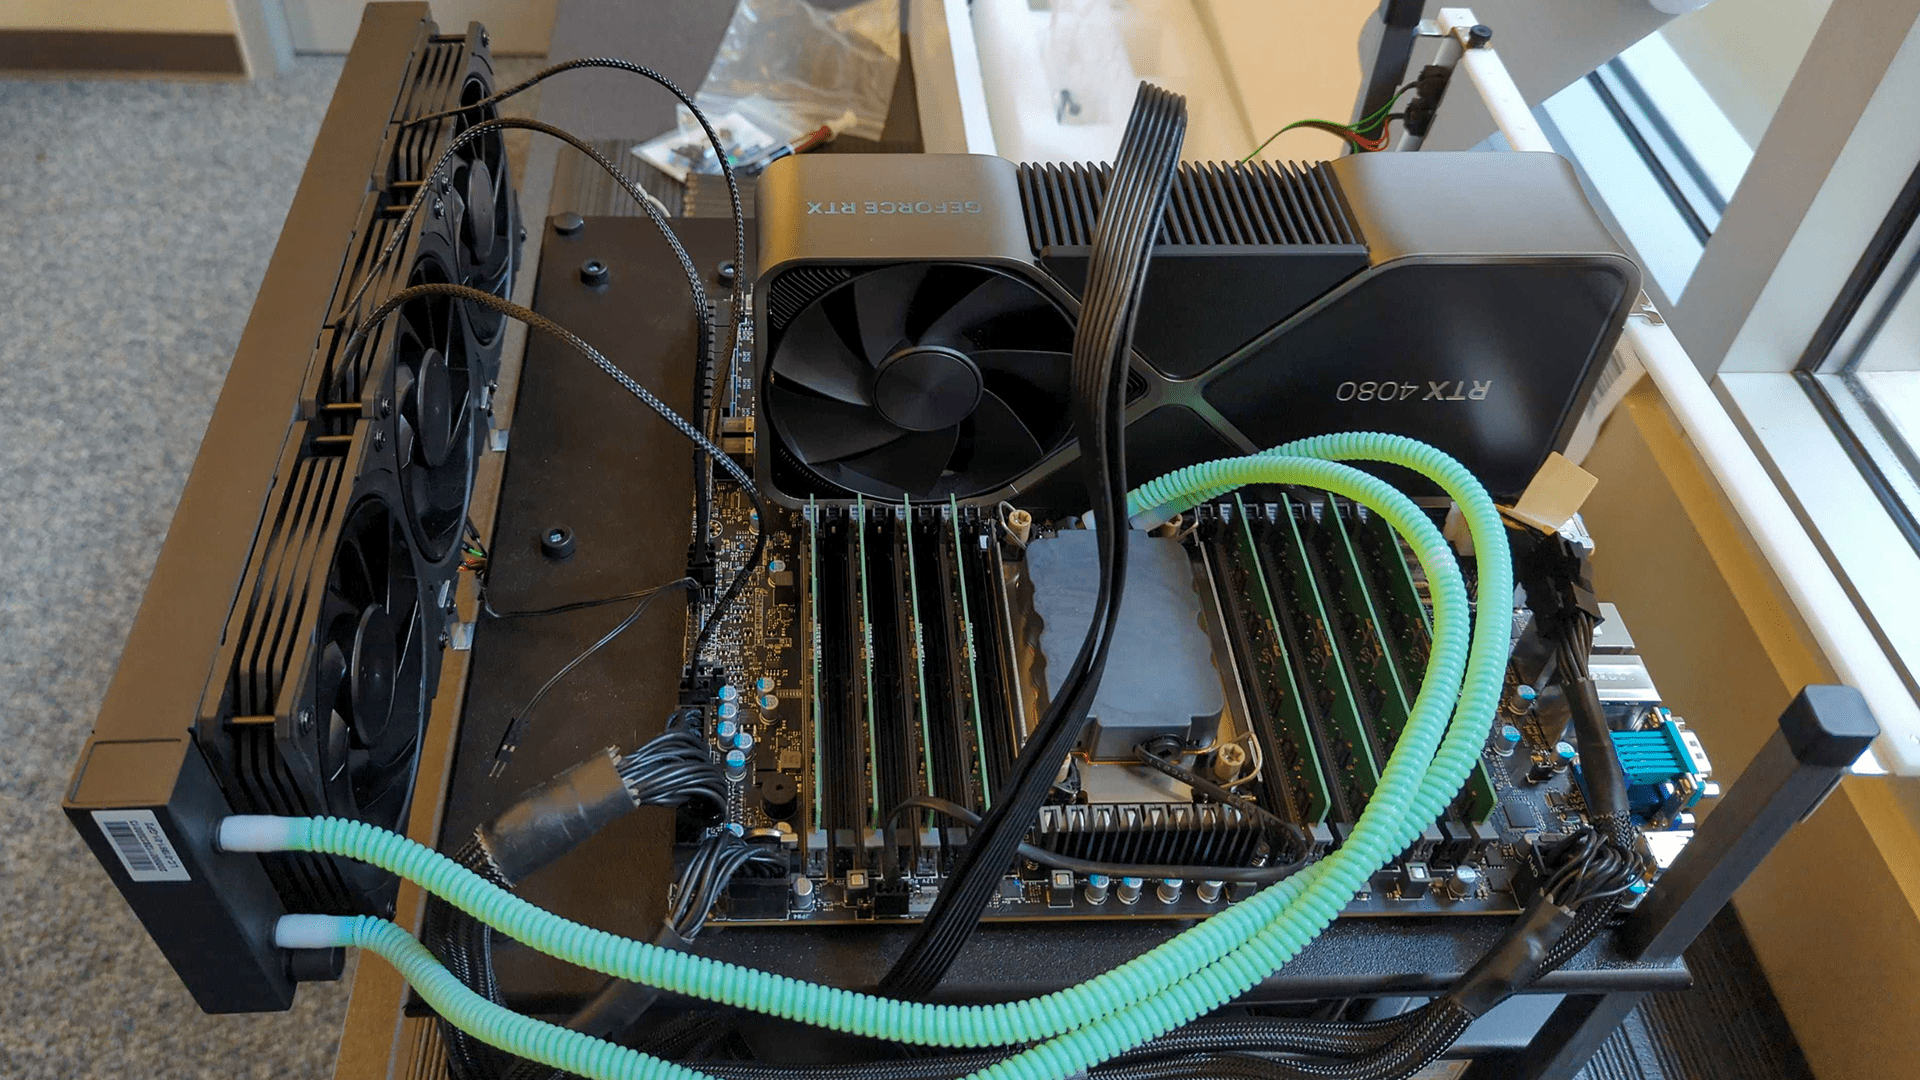 Intel Xeon W-3400 and W790 motherboard with AIO Liquid cooler